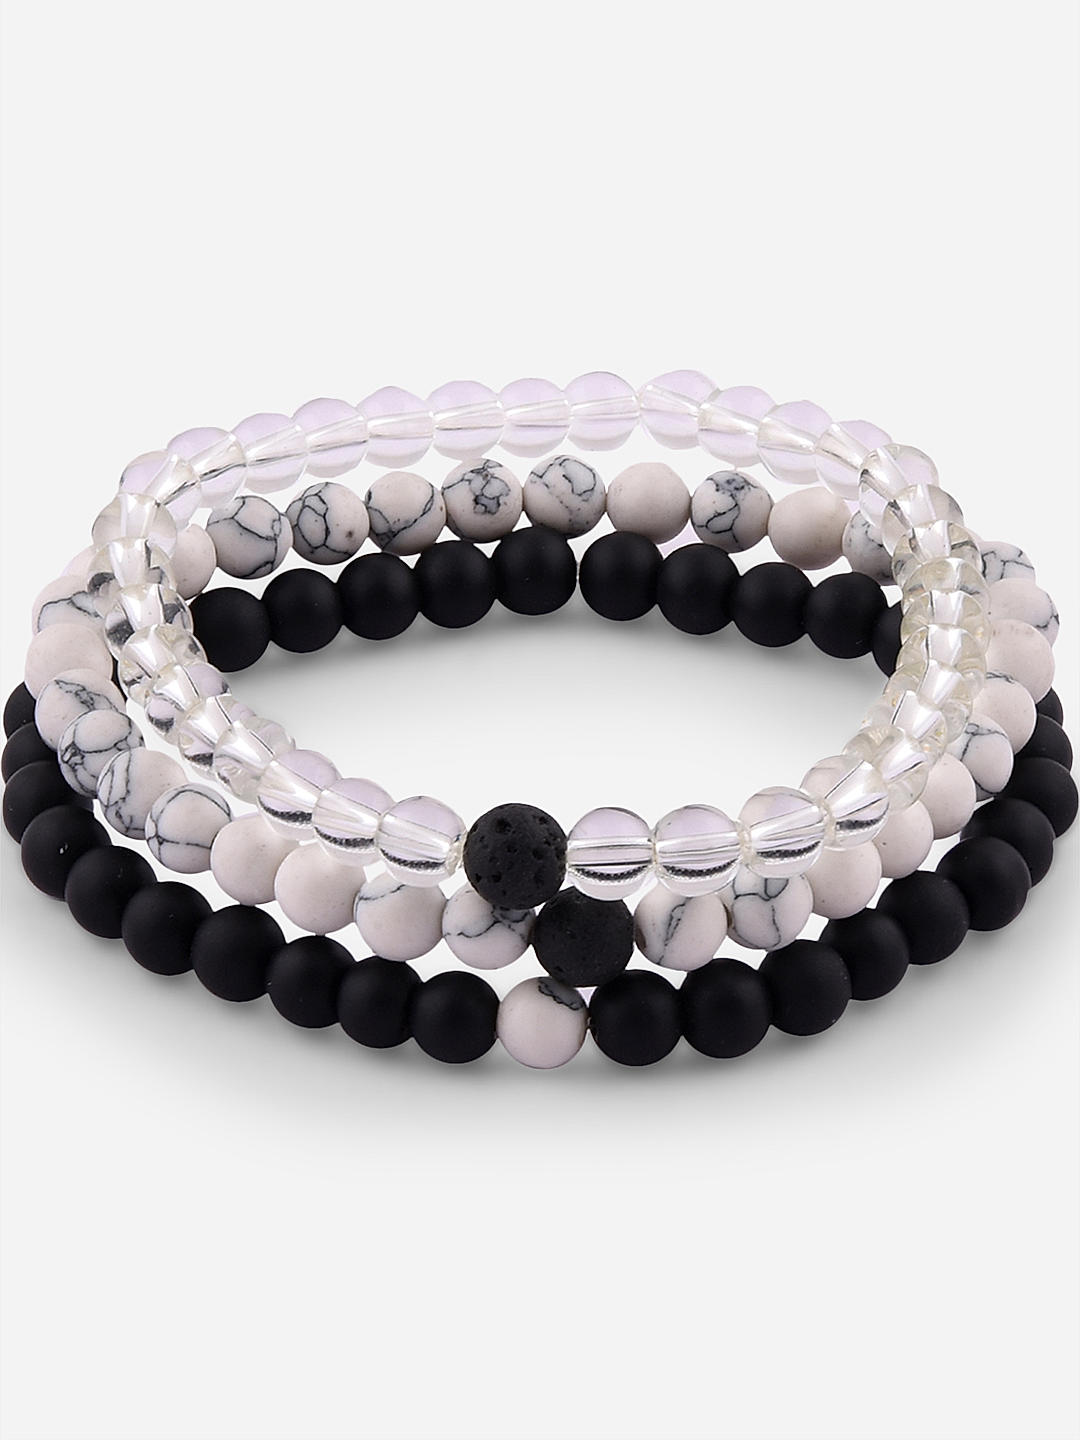 Andhuvan - 6mm - Matte Black Onyx Beaded Stretchy Bracelet with Silver  Hamsa Hands